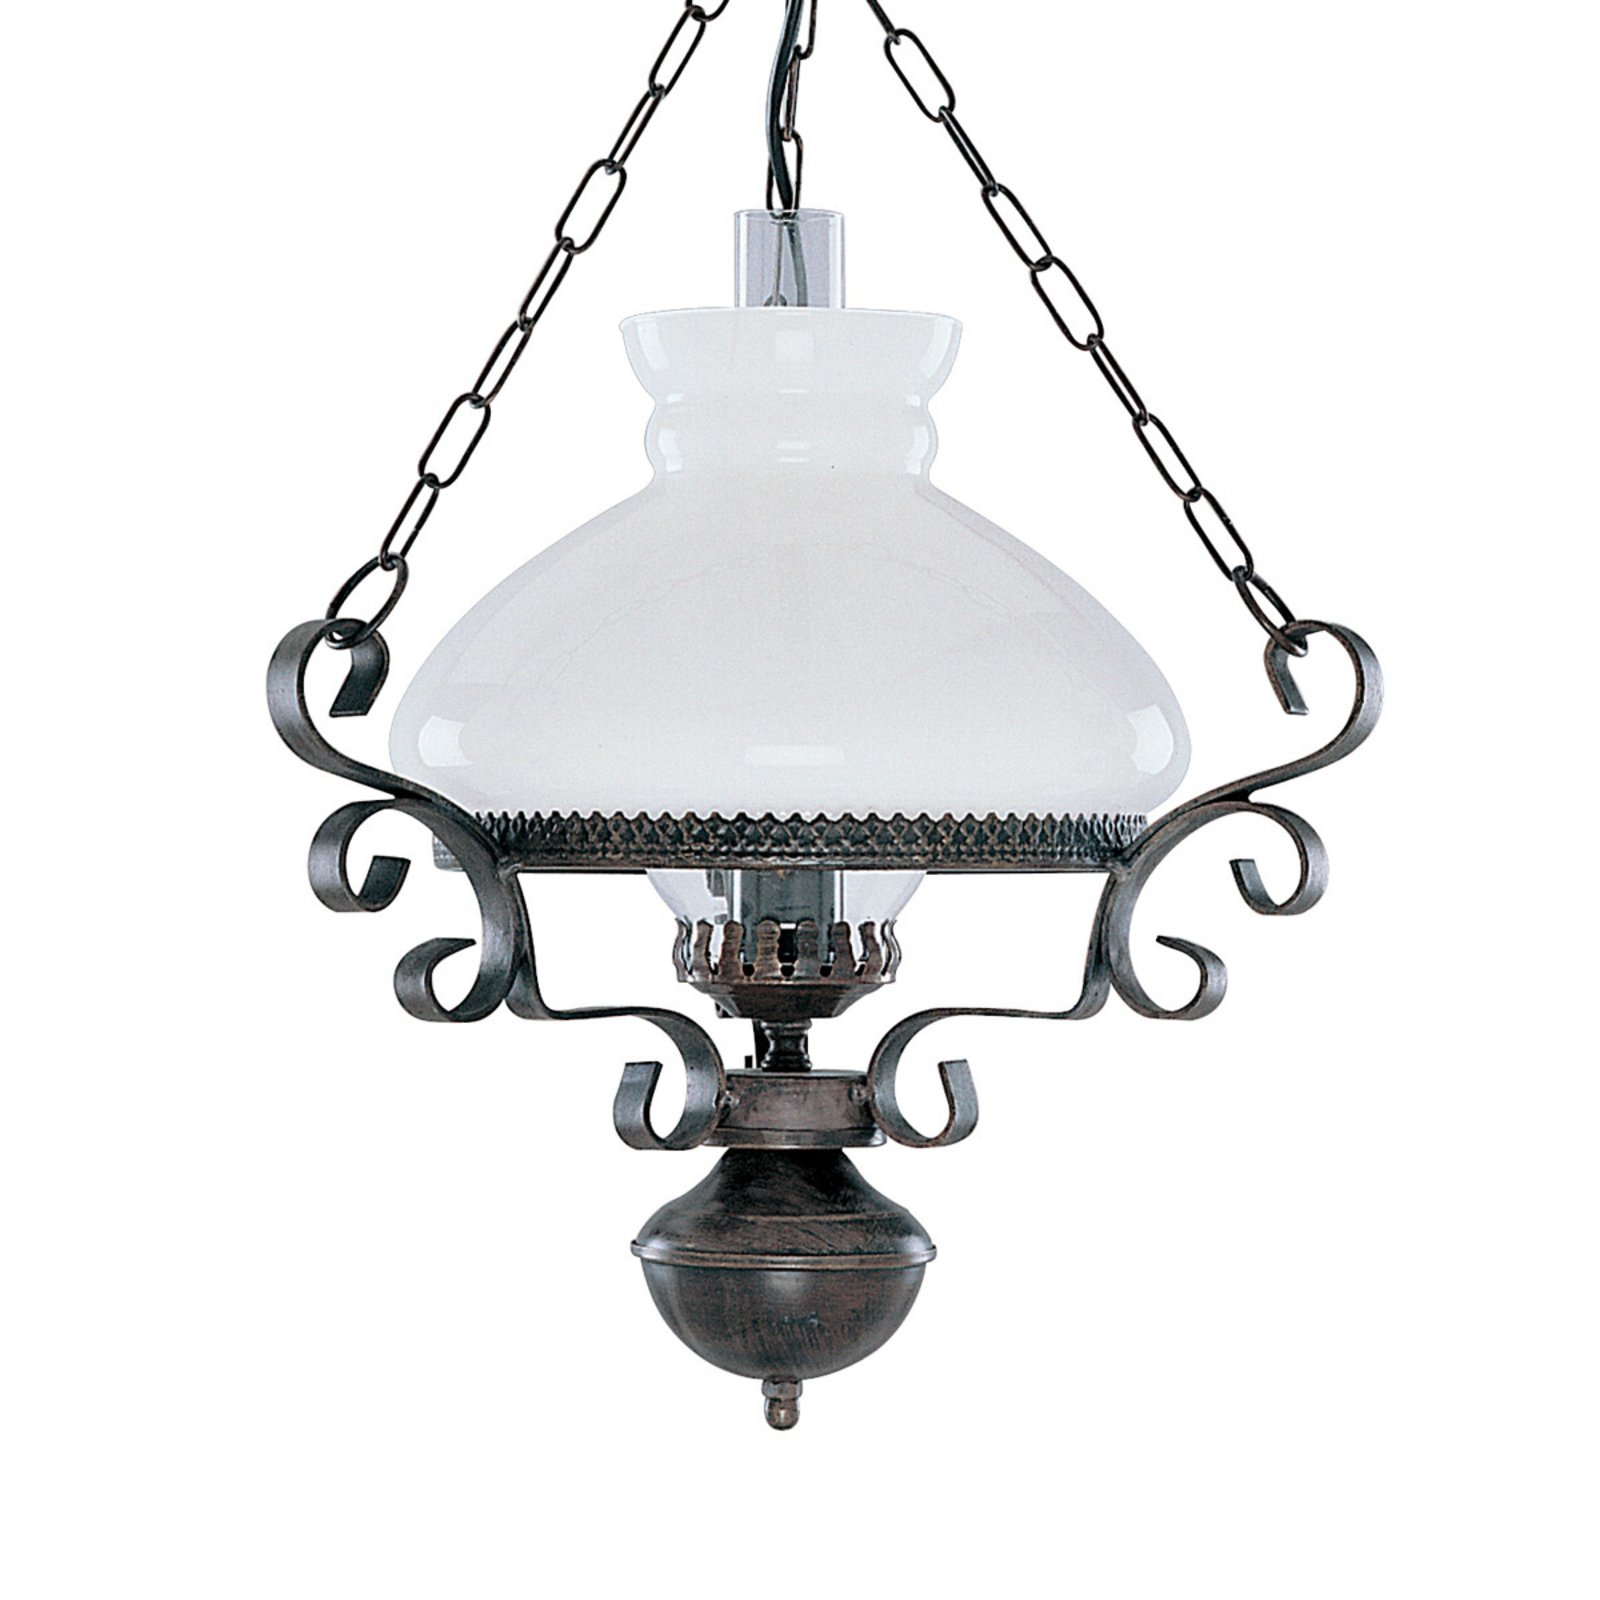 Oil Lantern - hanging lamp with antique charm